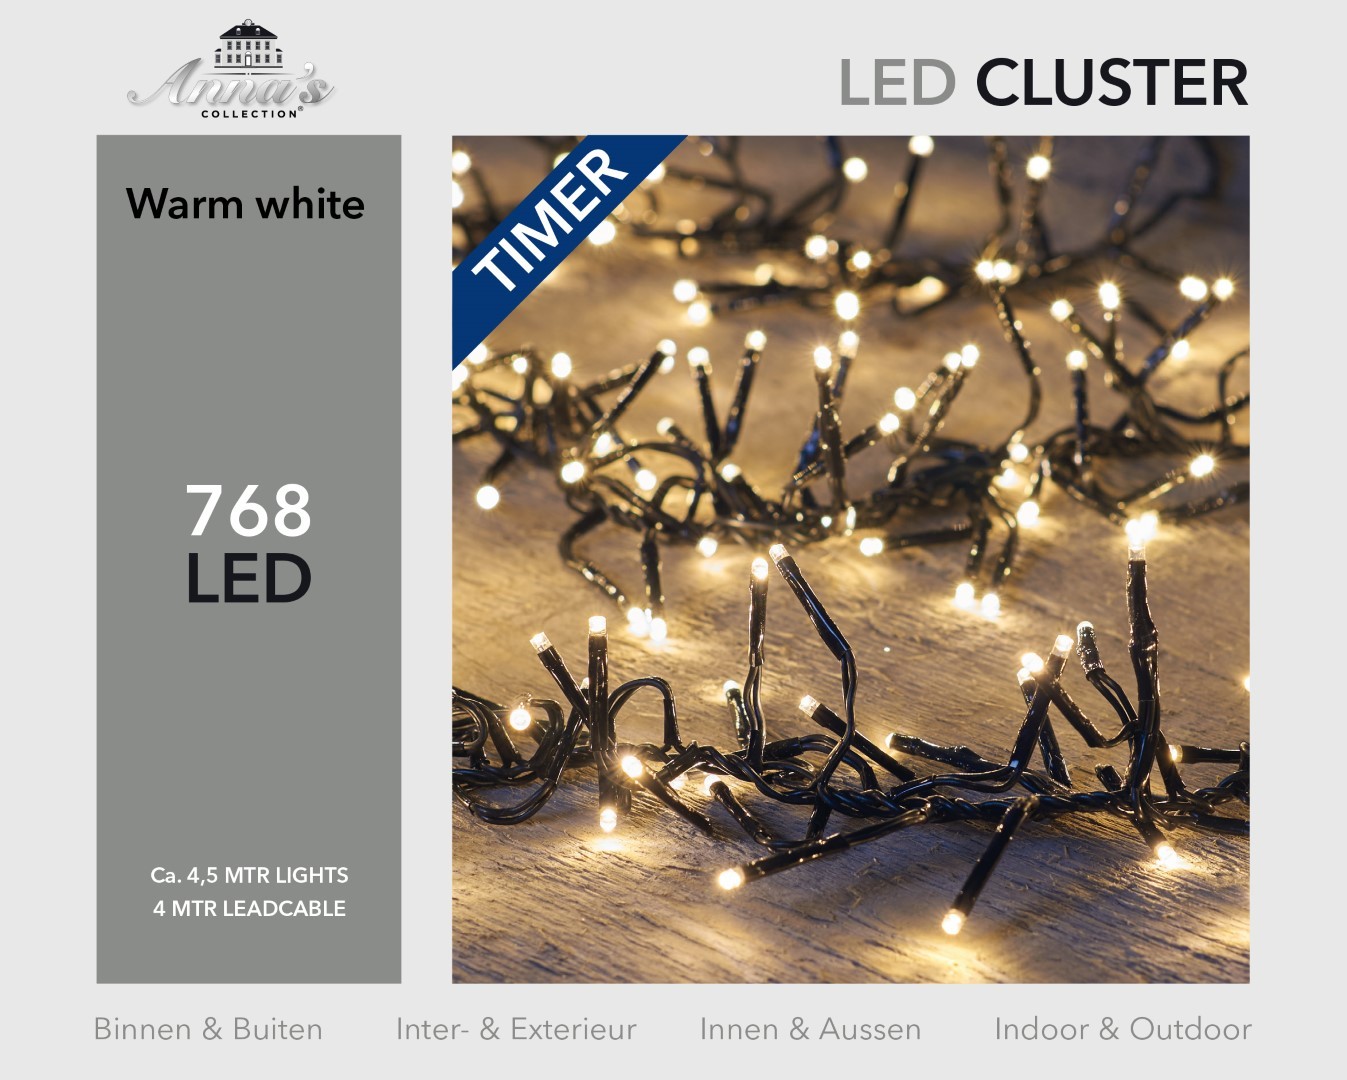 Clusterverlichting 768 led lampjes warm wit - Anna's Collection